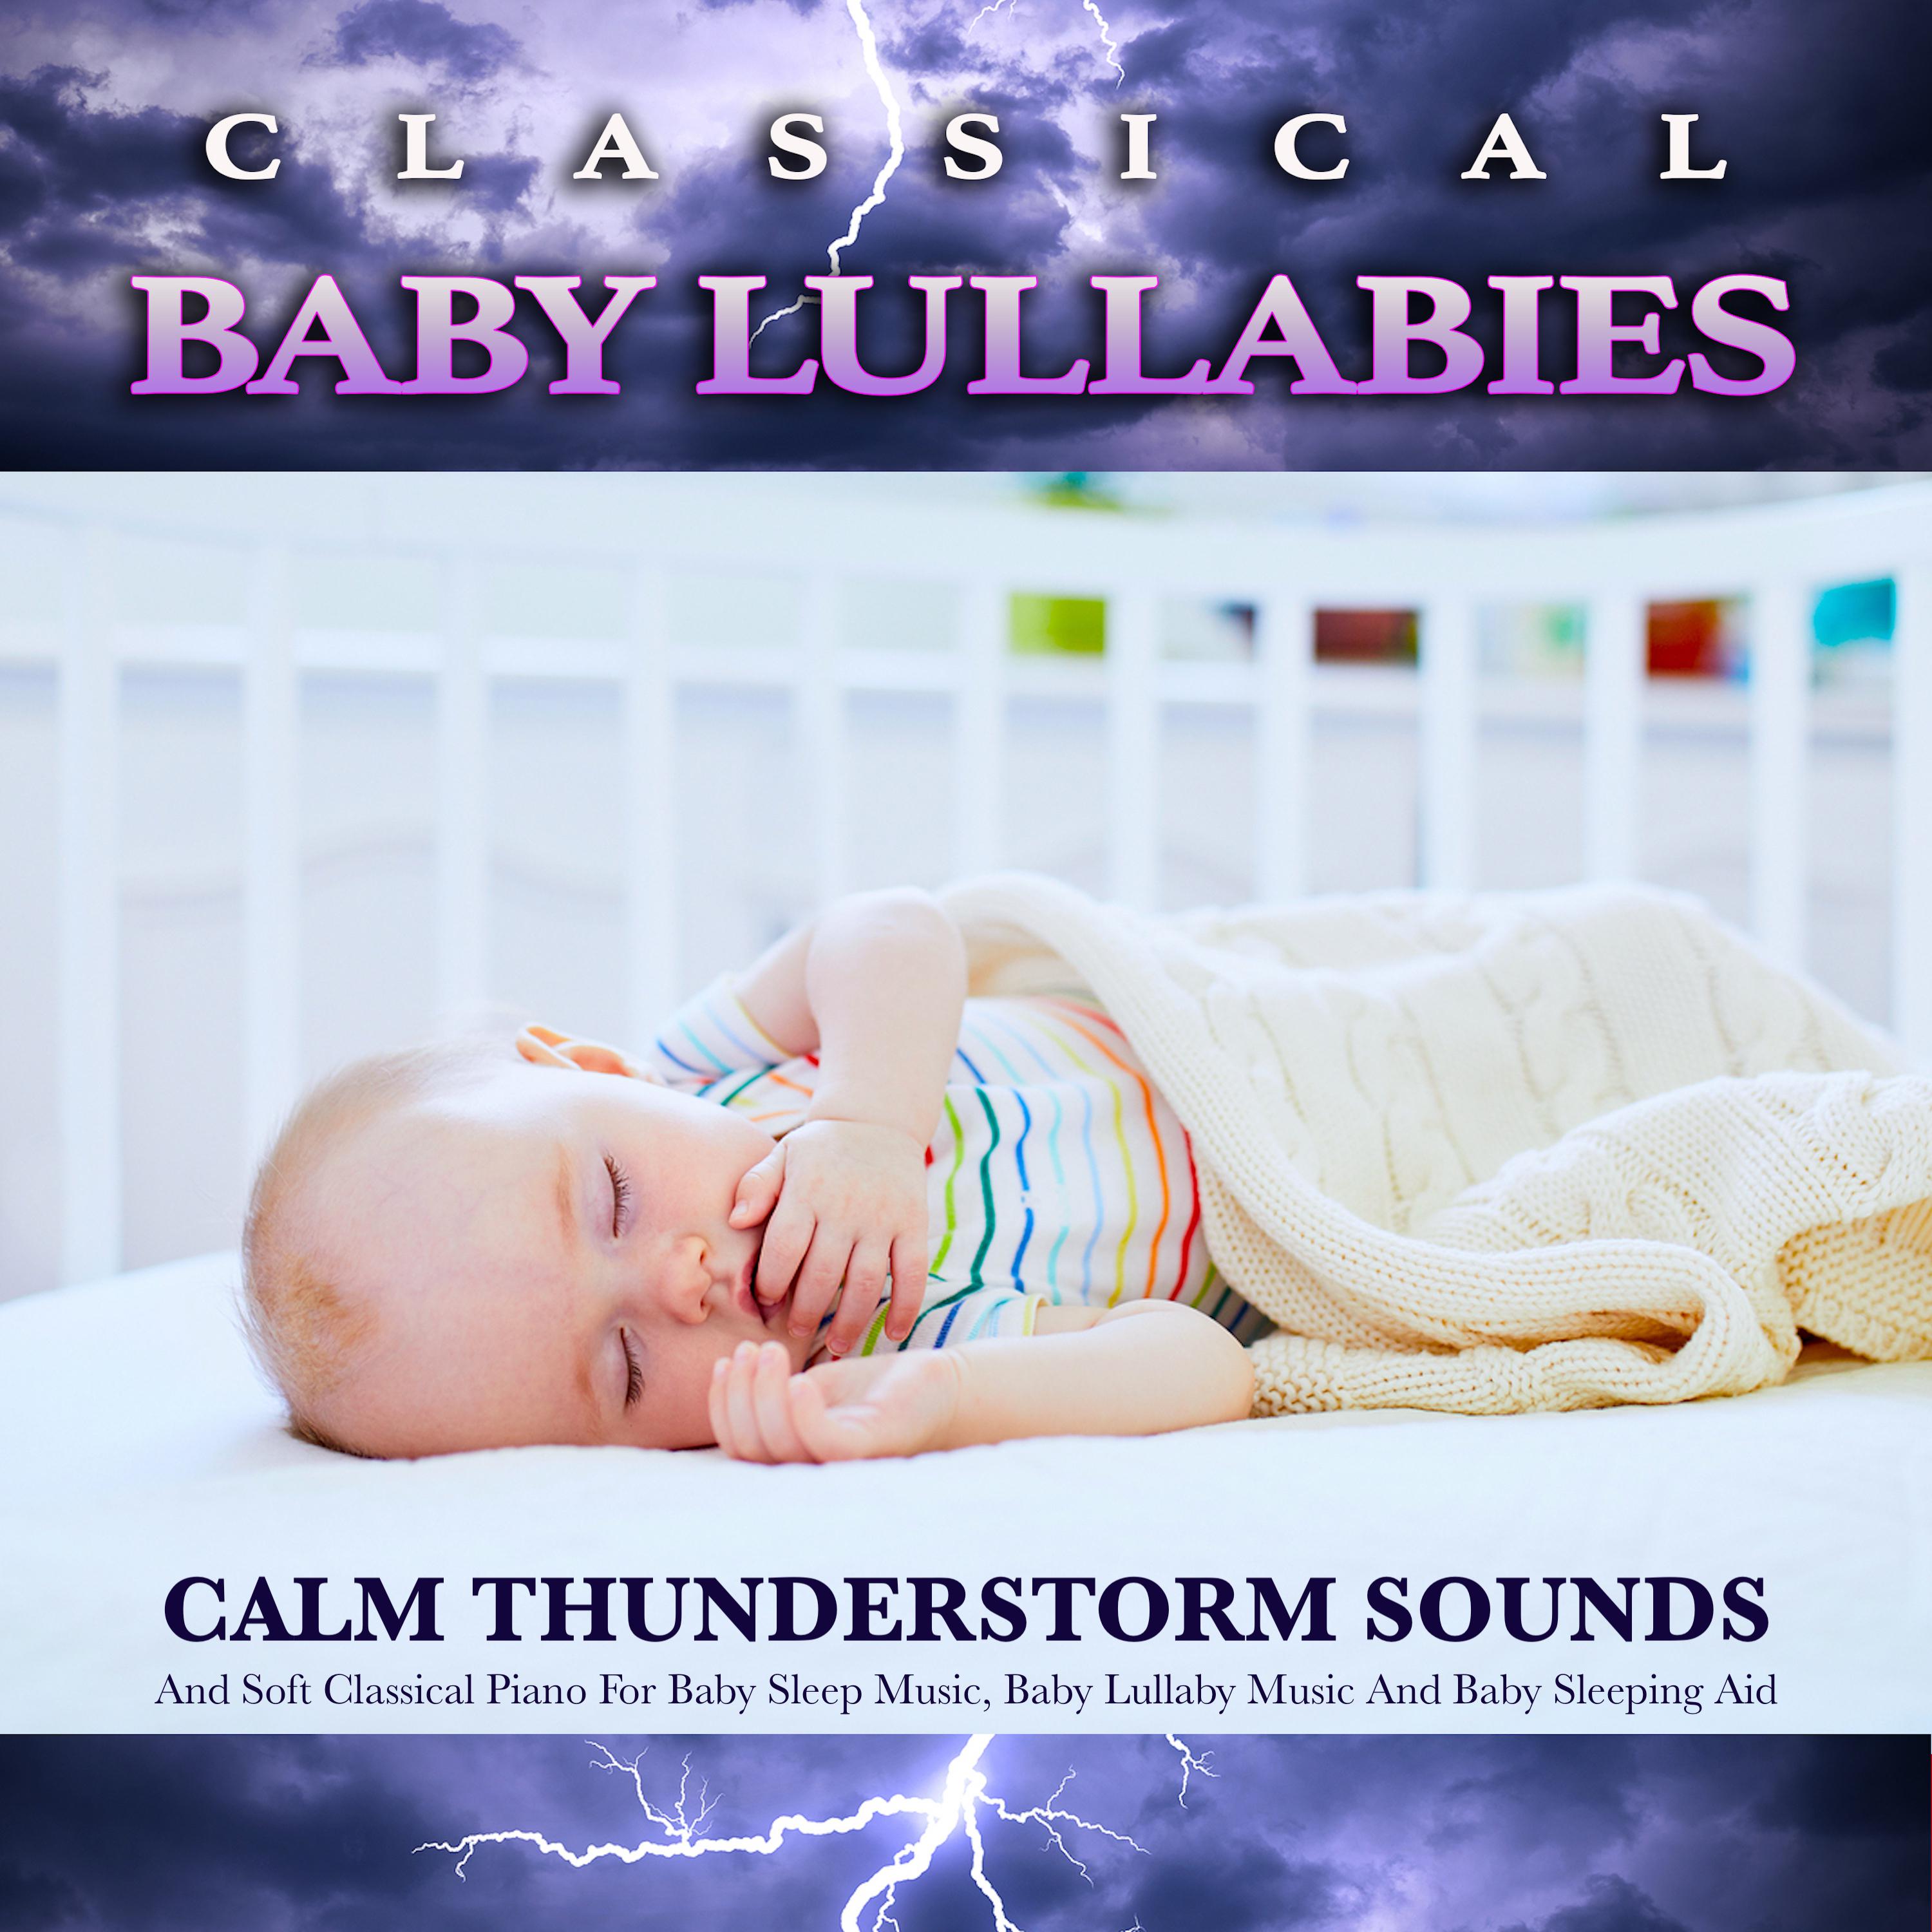 Fur Elise - Beethoven - Baby Lullaby - Baby Sleep Music - Classical Piano and Thunderstorm Sounds For Sleep